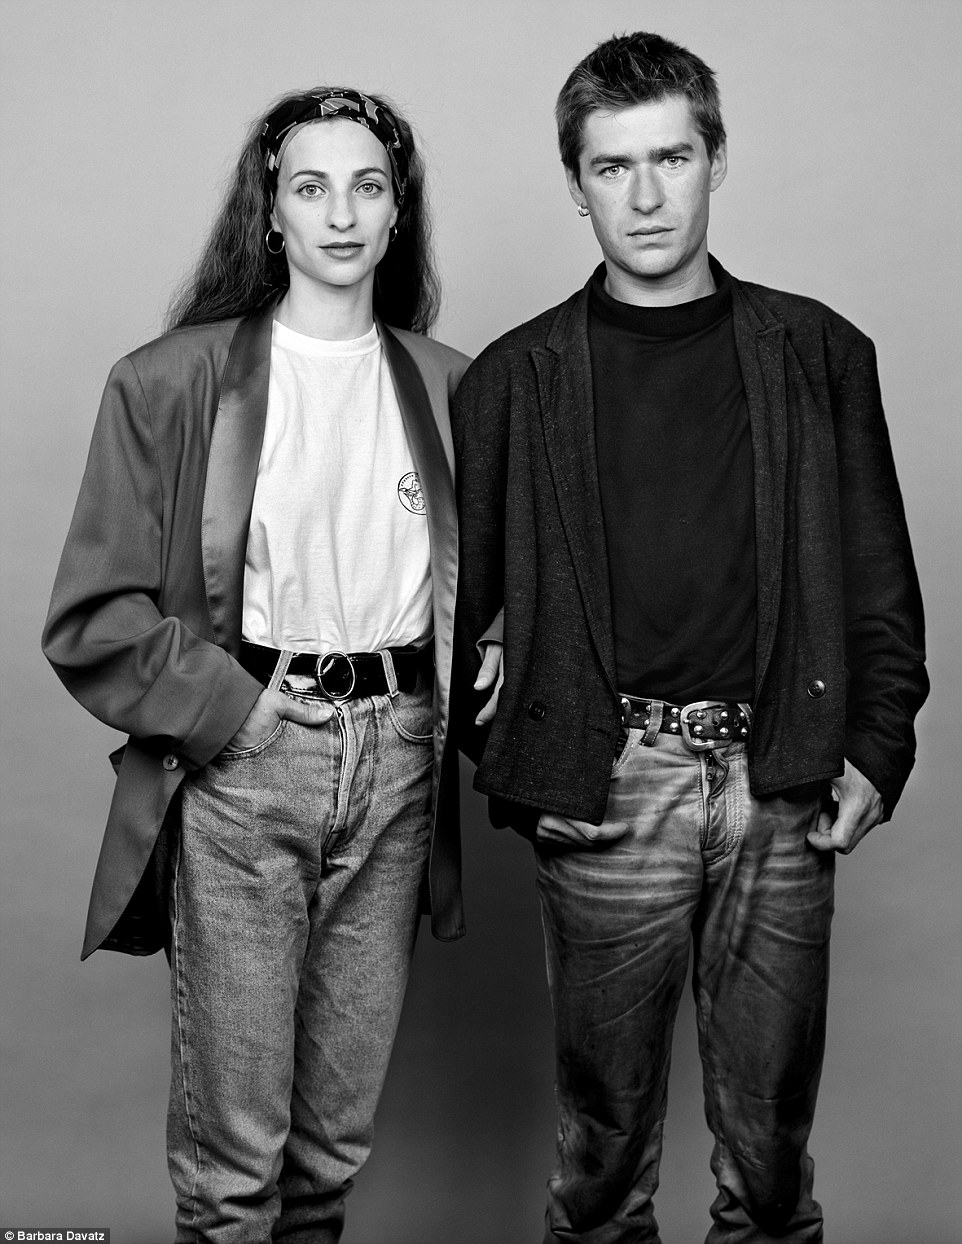 By 1988, Ernesto looked more conservative and wore jeans while Bianca pushed her hair back with a head scarf and the next time